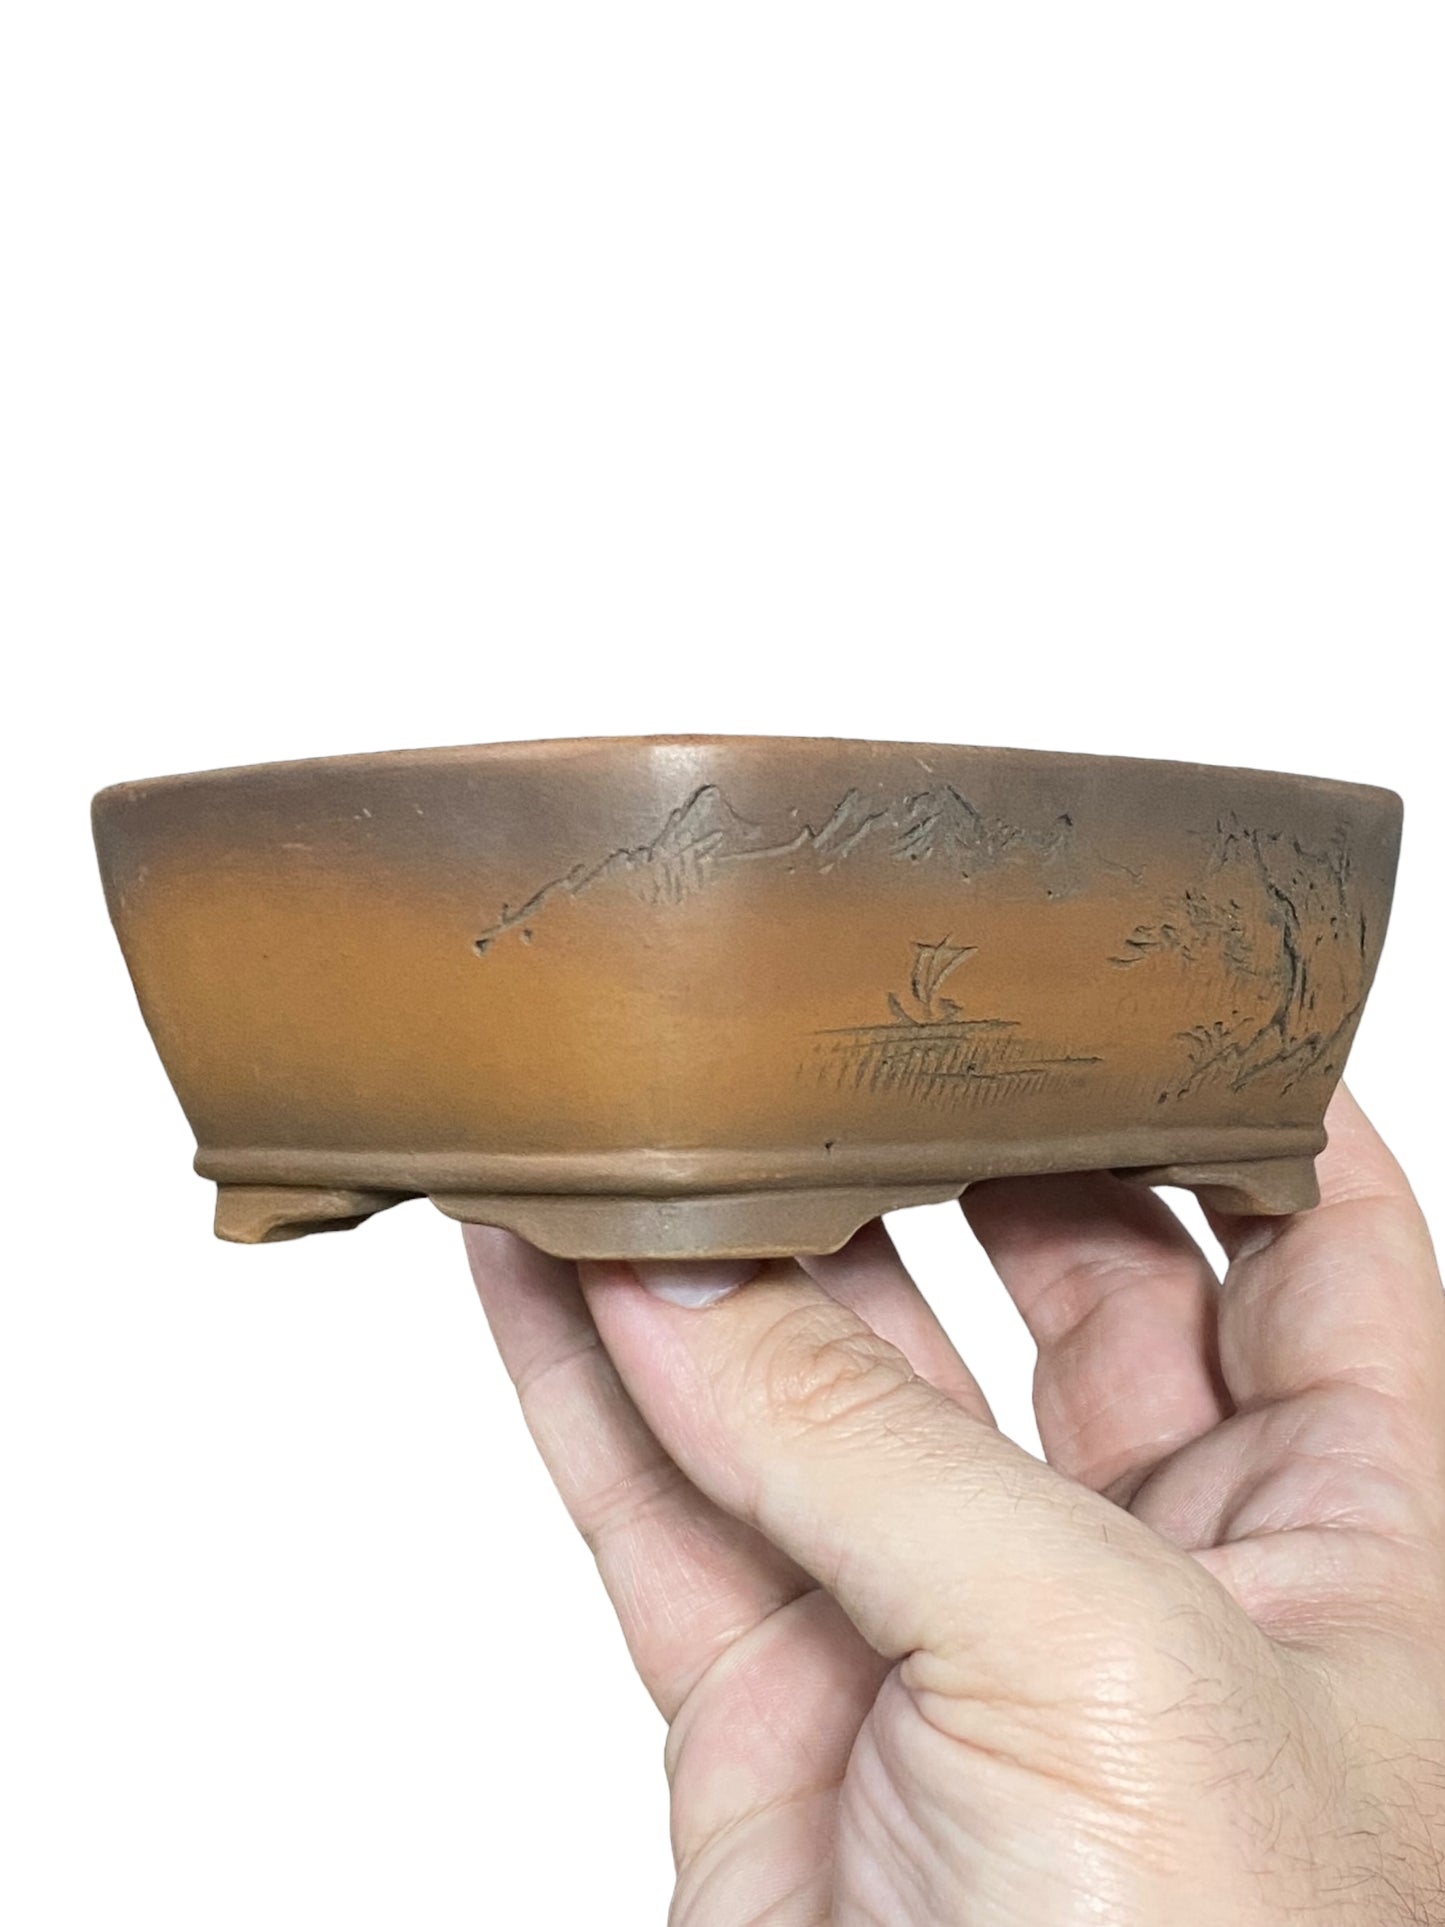 Bigei - Old Relief Carved Oval Style Bonsai Pot